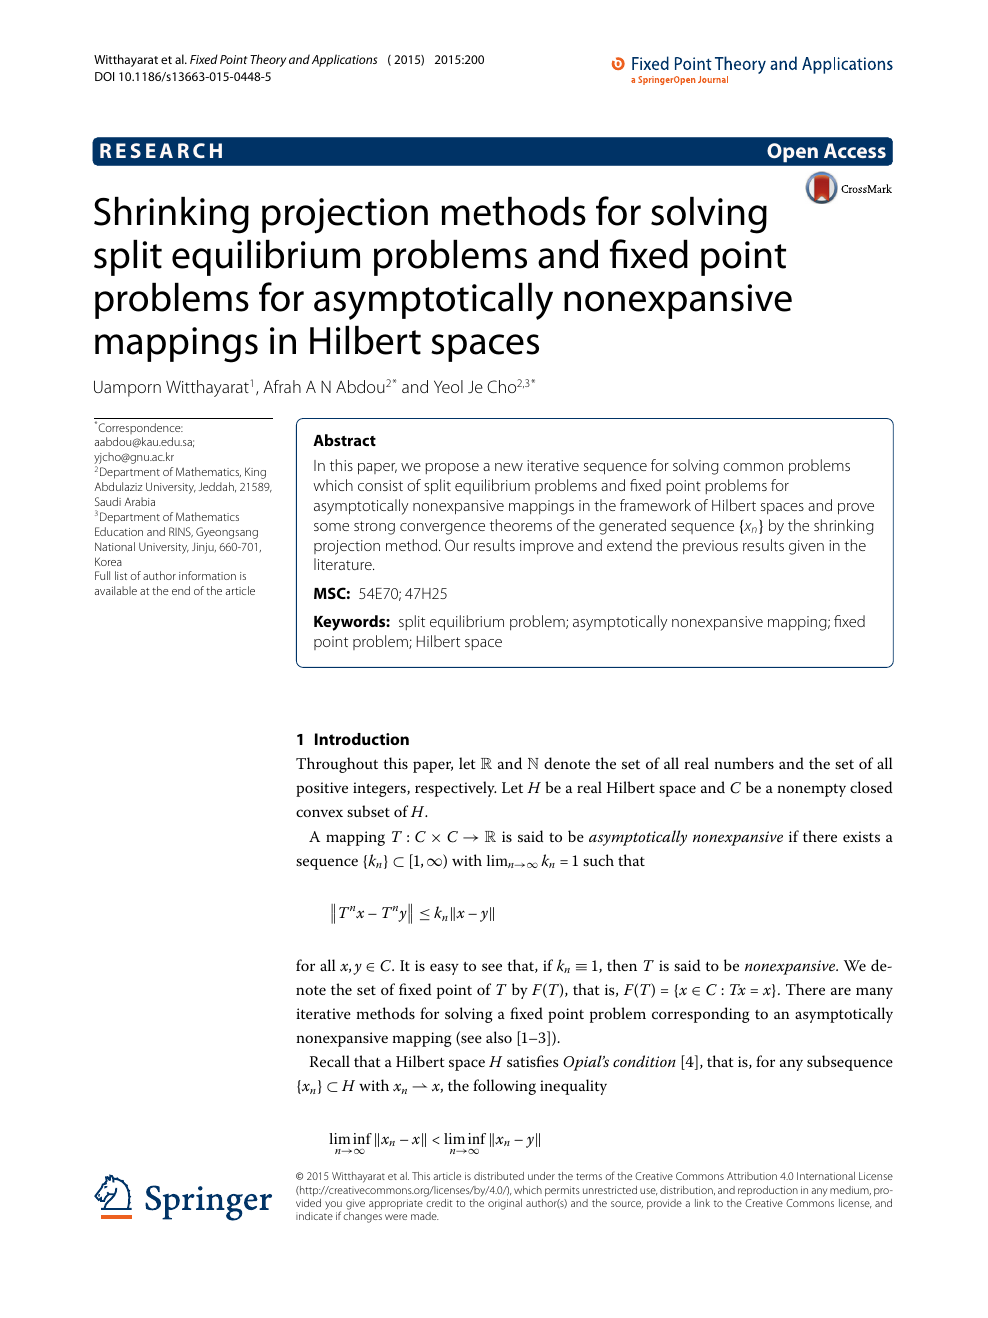 Shrinking Projection Methods For Solving Split Equilibrium Problems And Fixed Point Problems For Asymptotically Nonexpansive Mappings In Hilbert Spaces Topic Of Research Paper In Mathematics Download Scholarly Article Pdf And Read